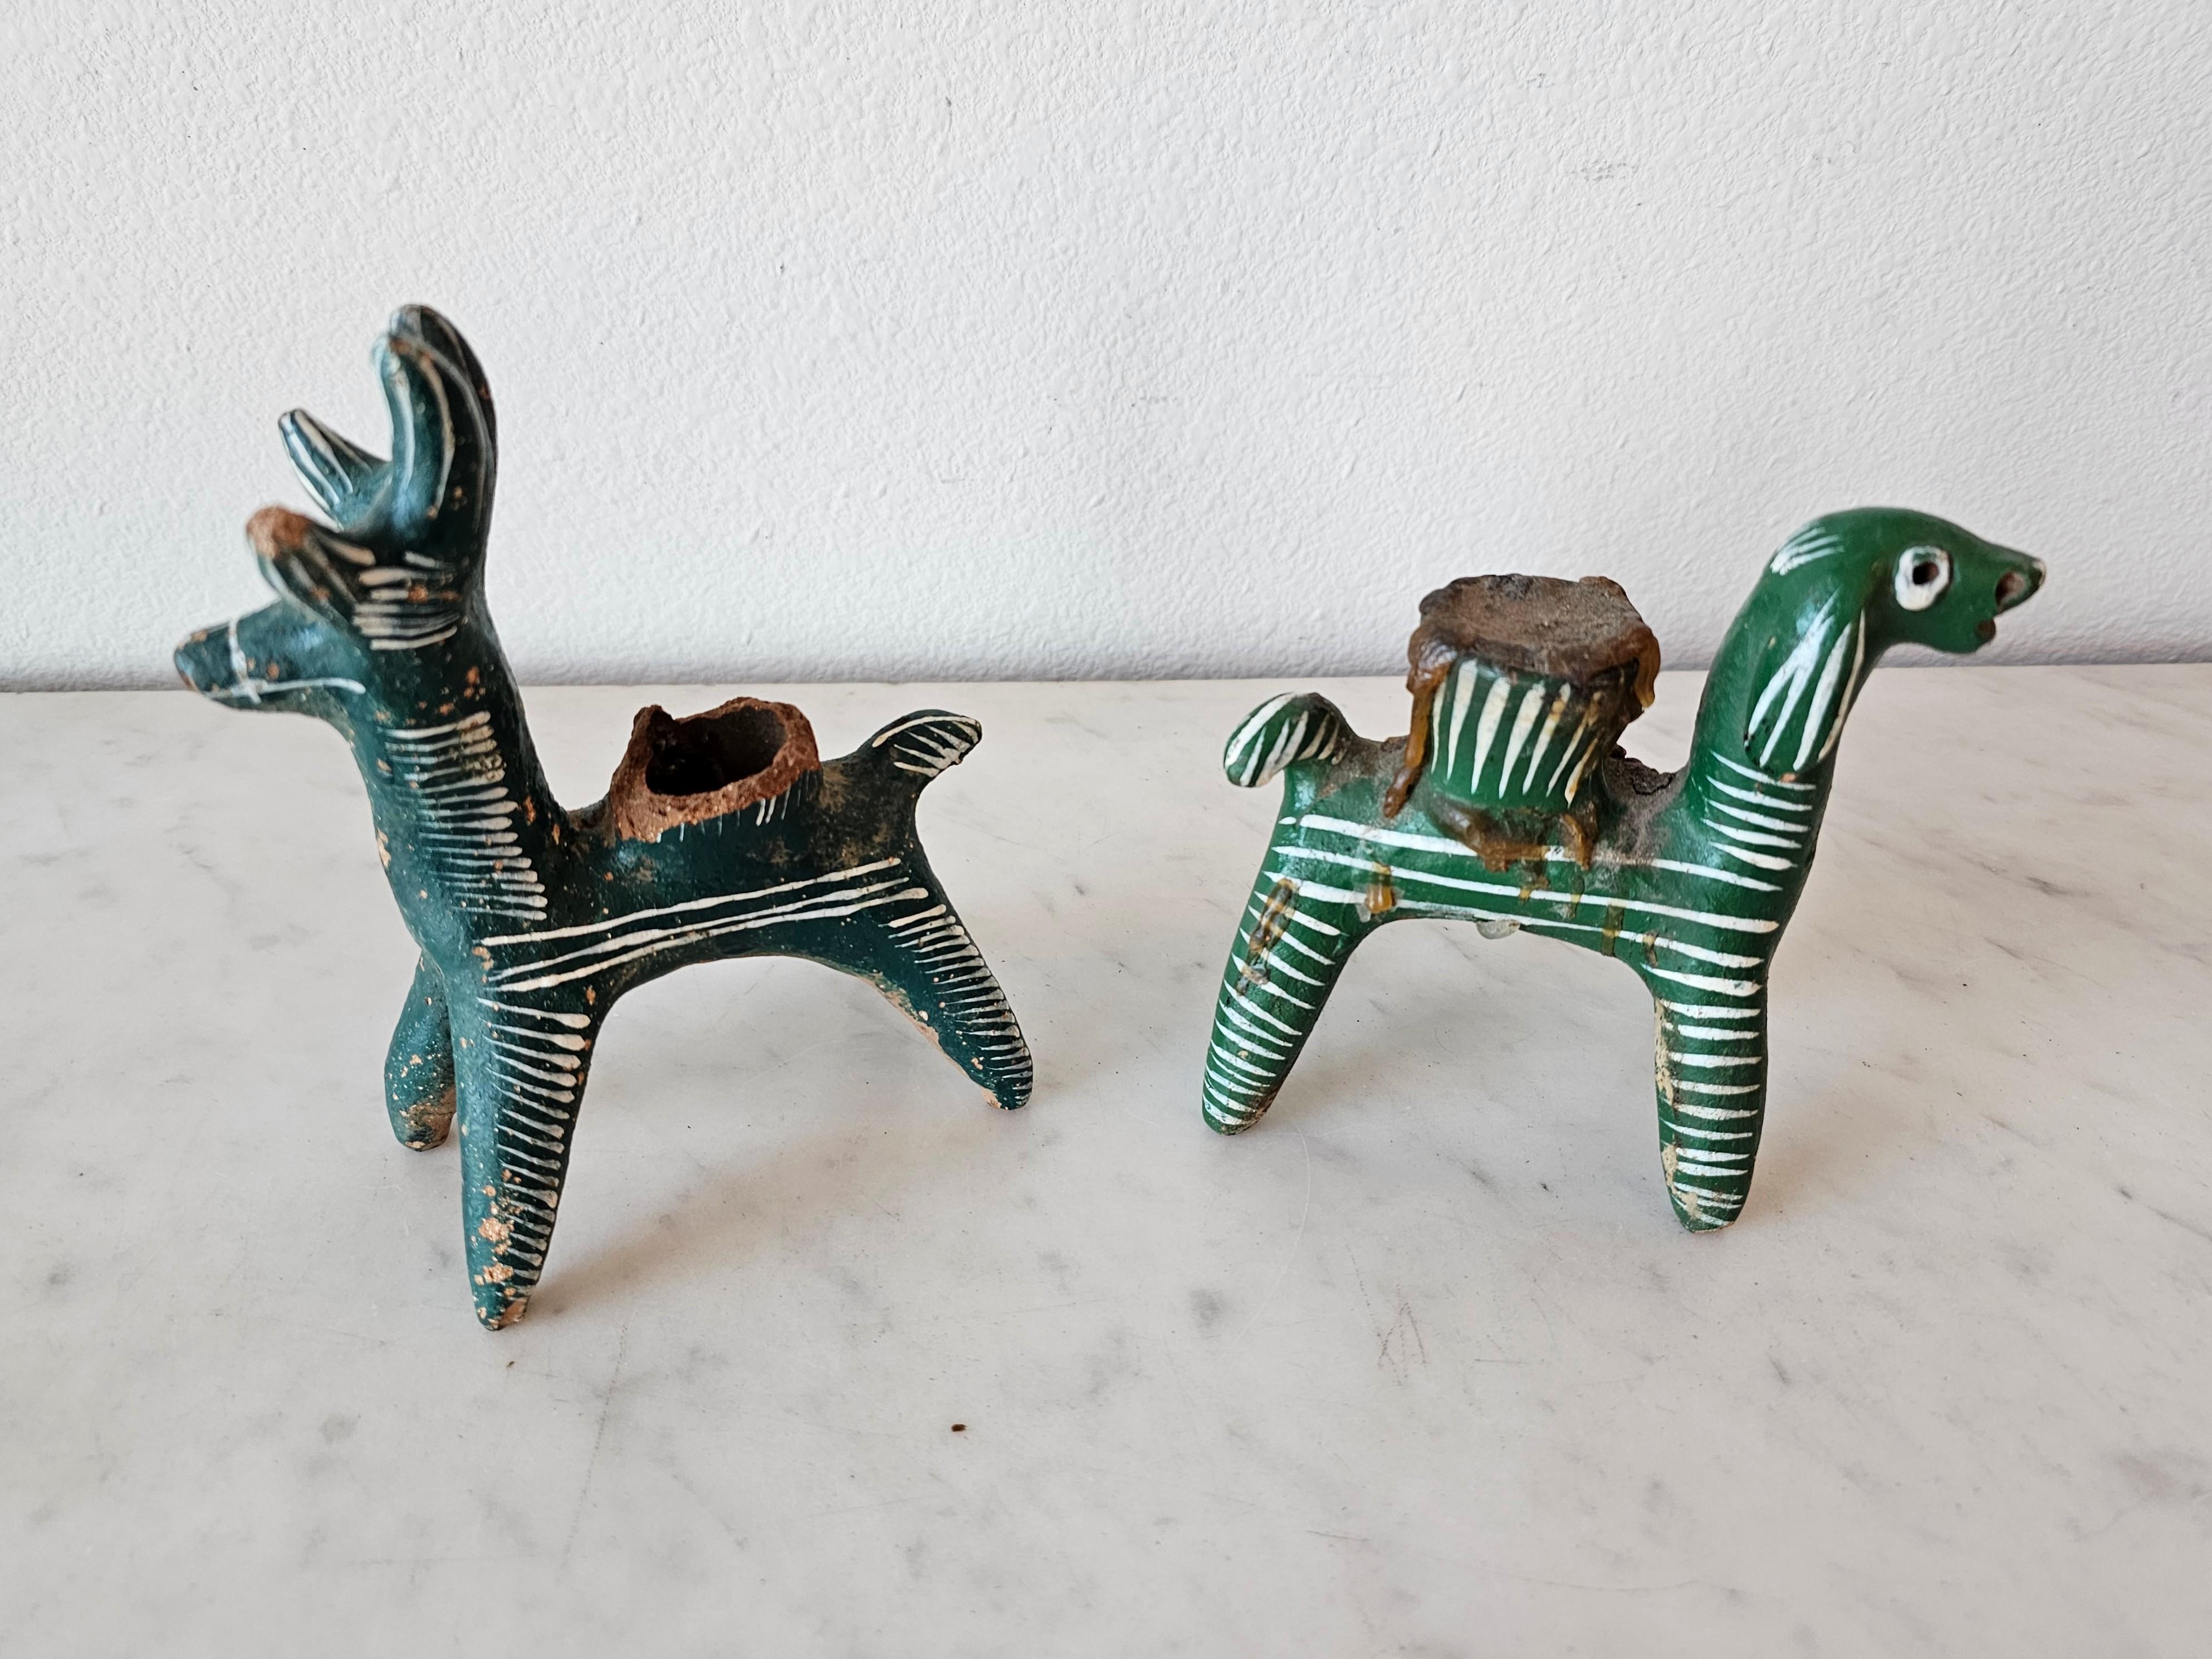 A most charming pair of two rare and whimsical indigenous Nahua peoples pottery animal folk art candleholders.

Handmade in the village of Chililico, Hidalgo, Central Mexico, primitive lightly fired earthenware, figural sculptural form, depicting a